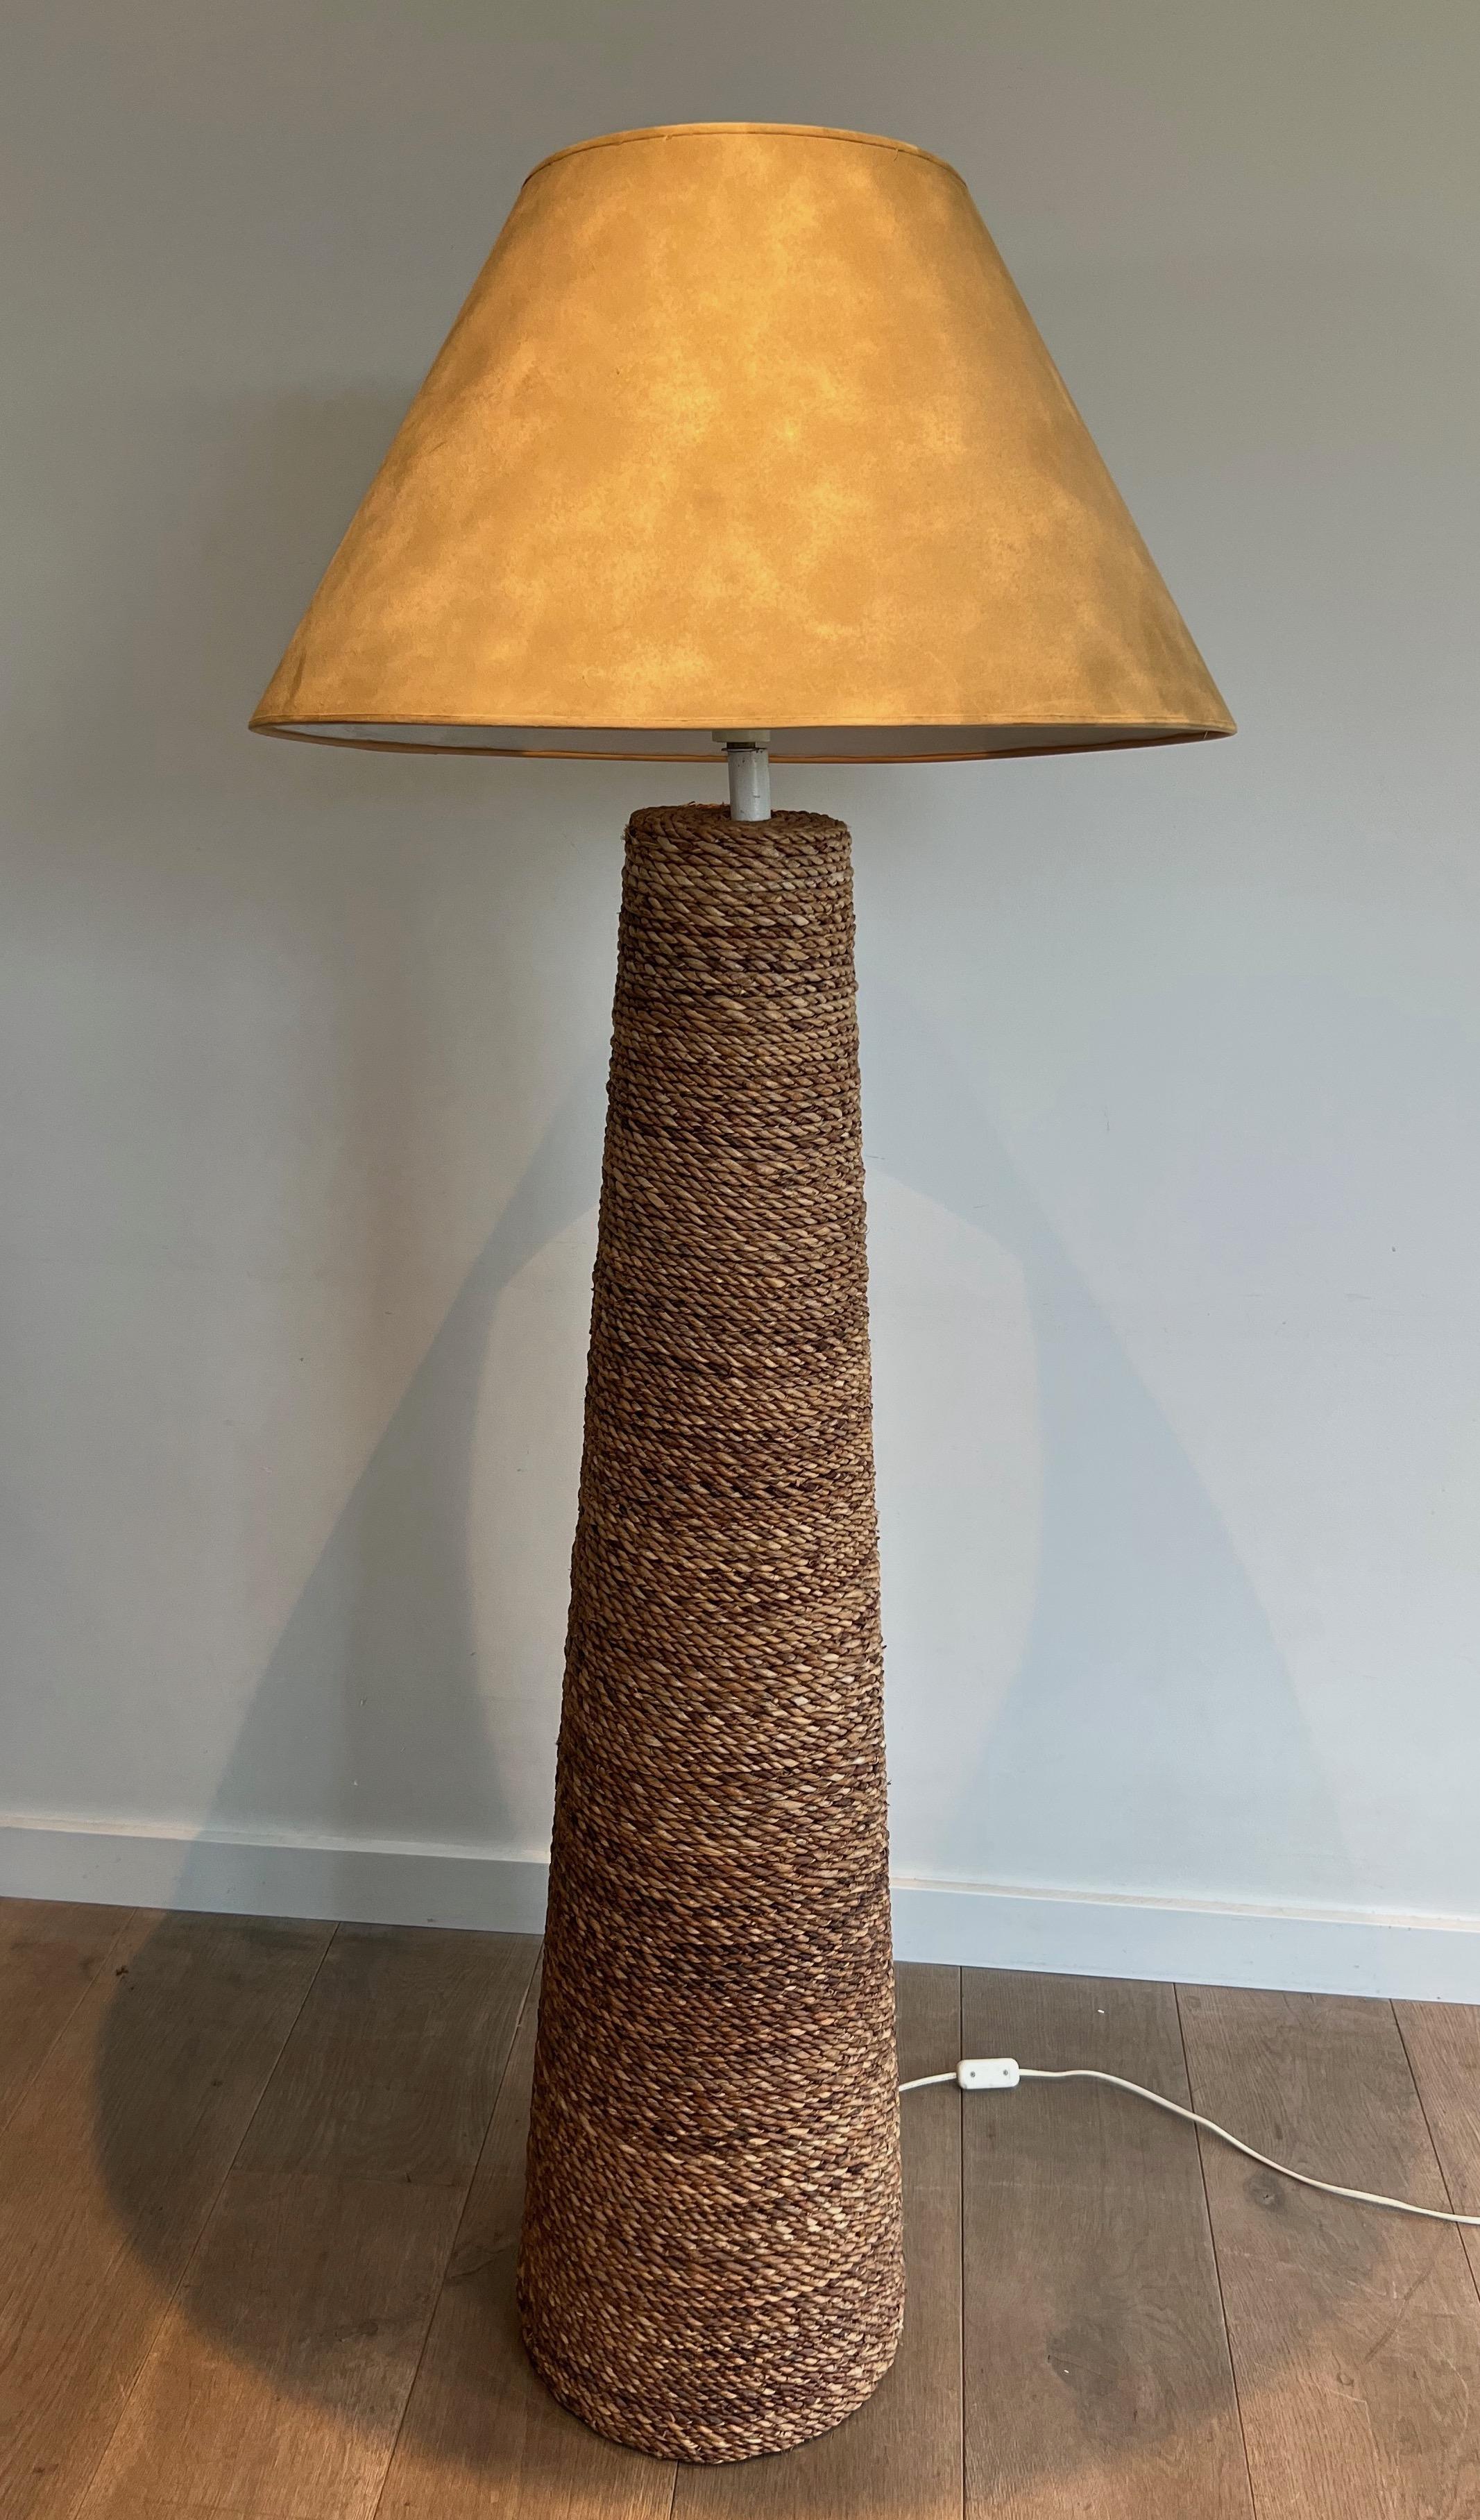 This conical floor lamp is made of rope. This is a French work in the style of Adrien Audoux & Frida Minet. Circa 1950